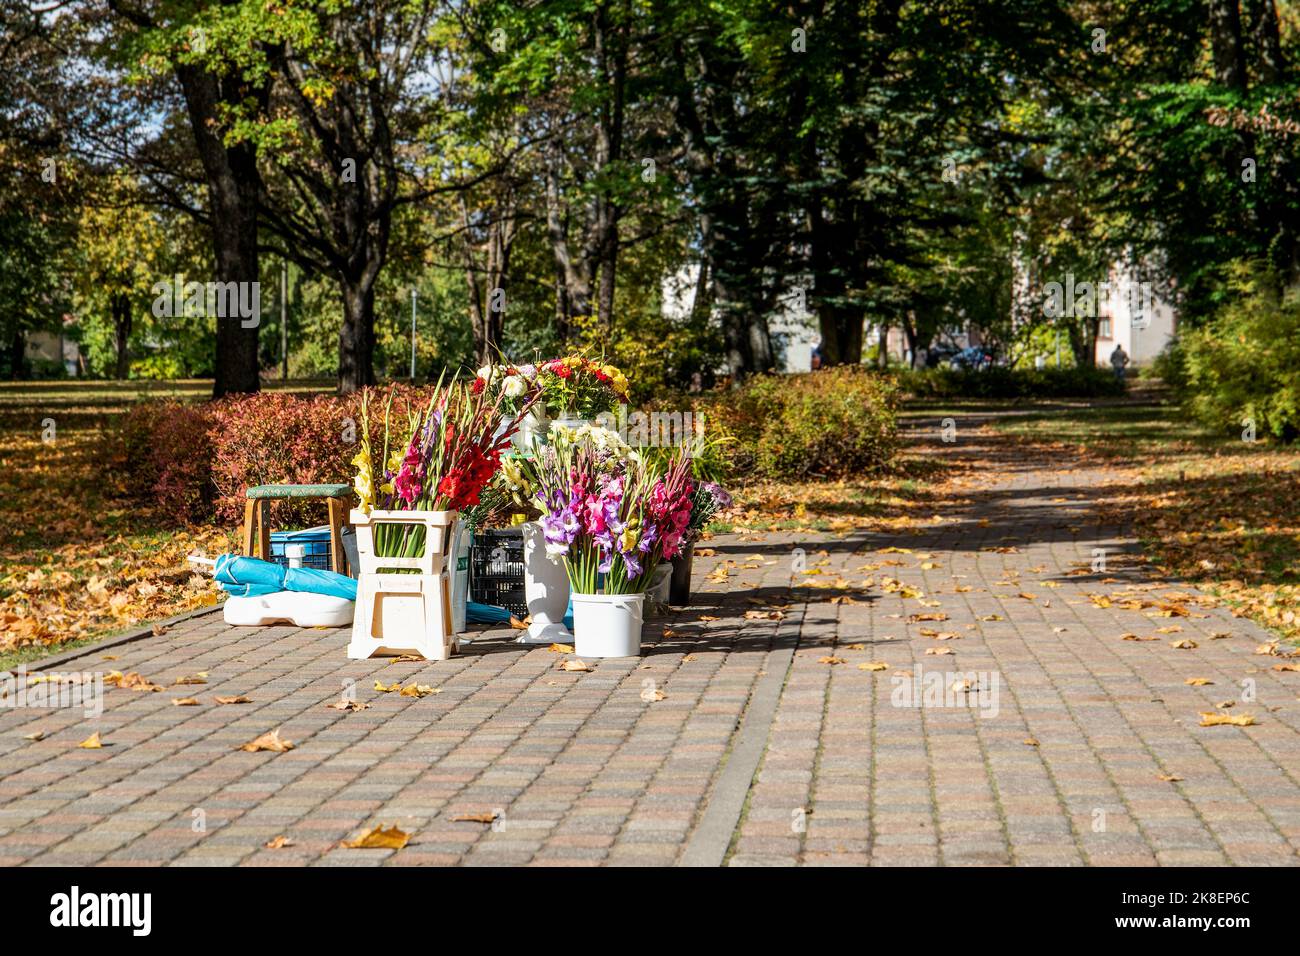 Selling flowers on the street. City park, autumn view. Stock Photo